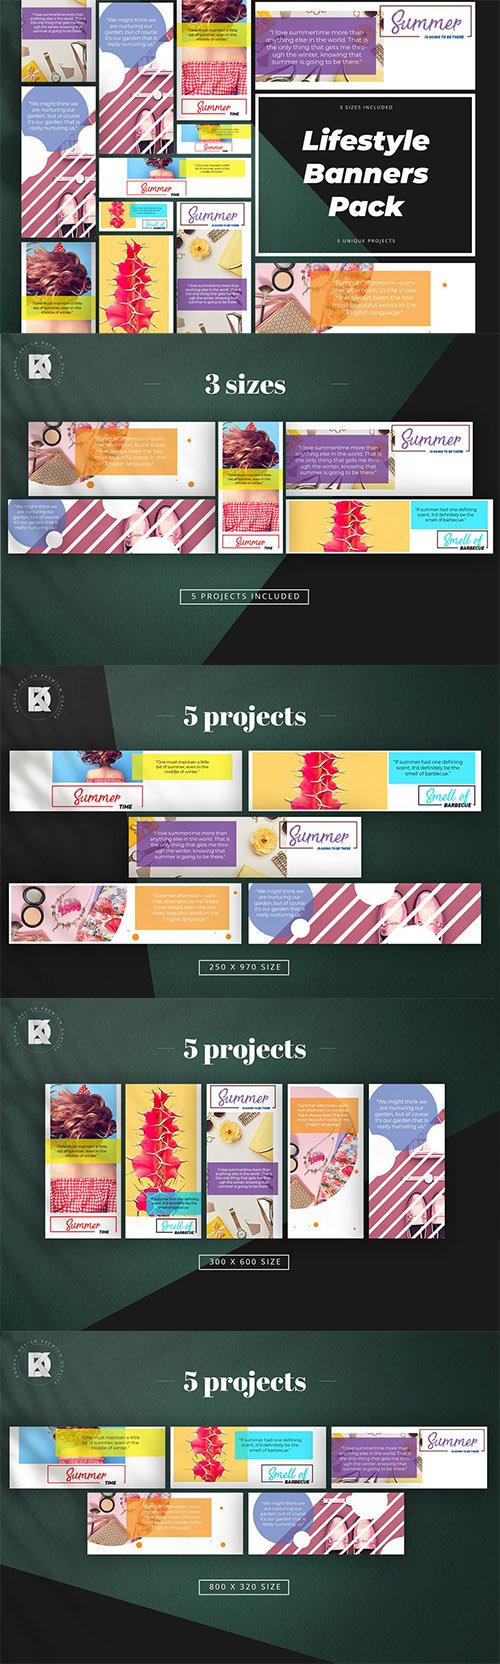 Lifestyle Banner Pack PSD